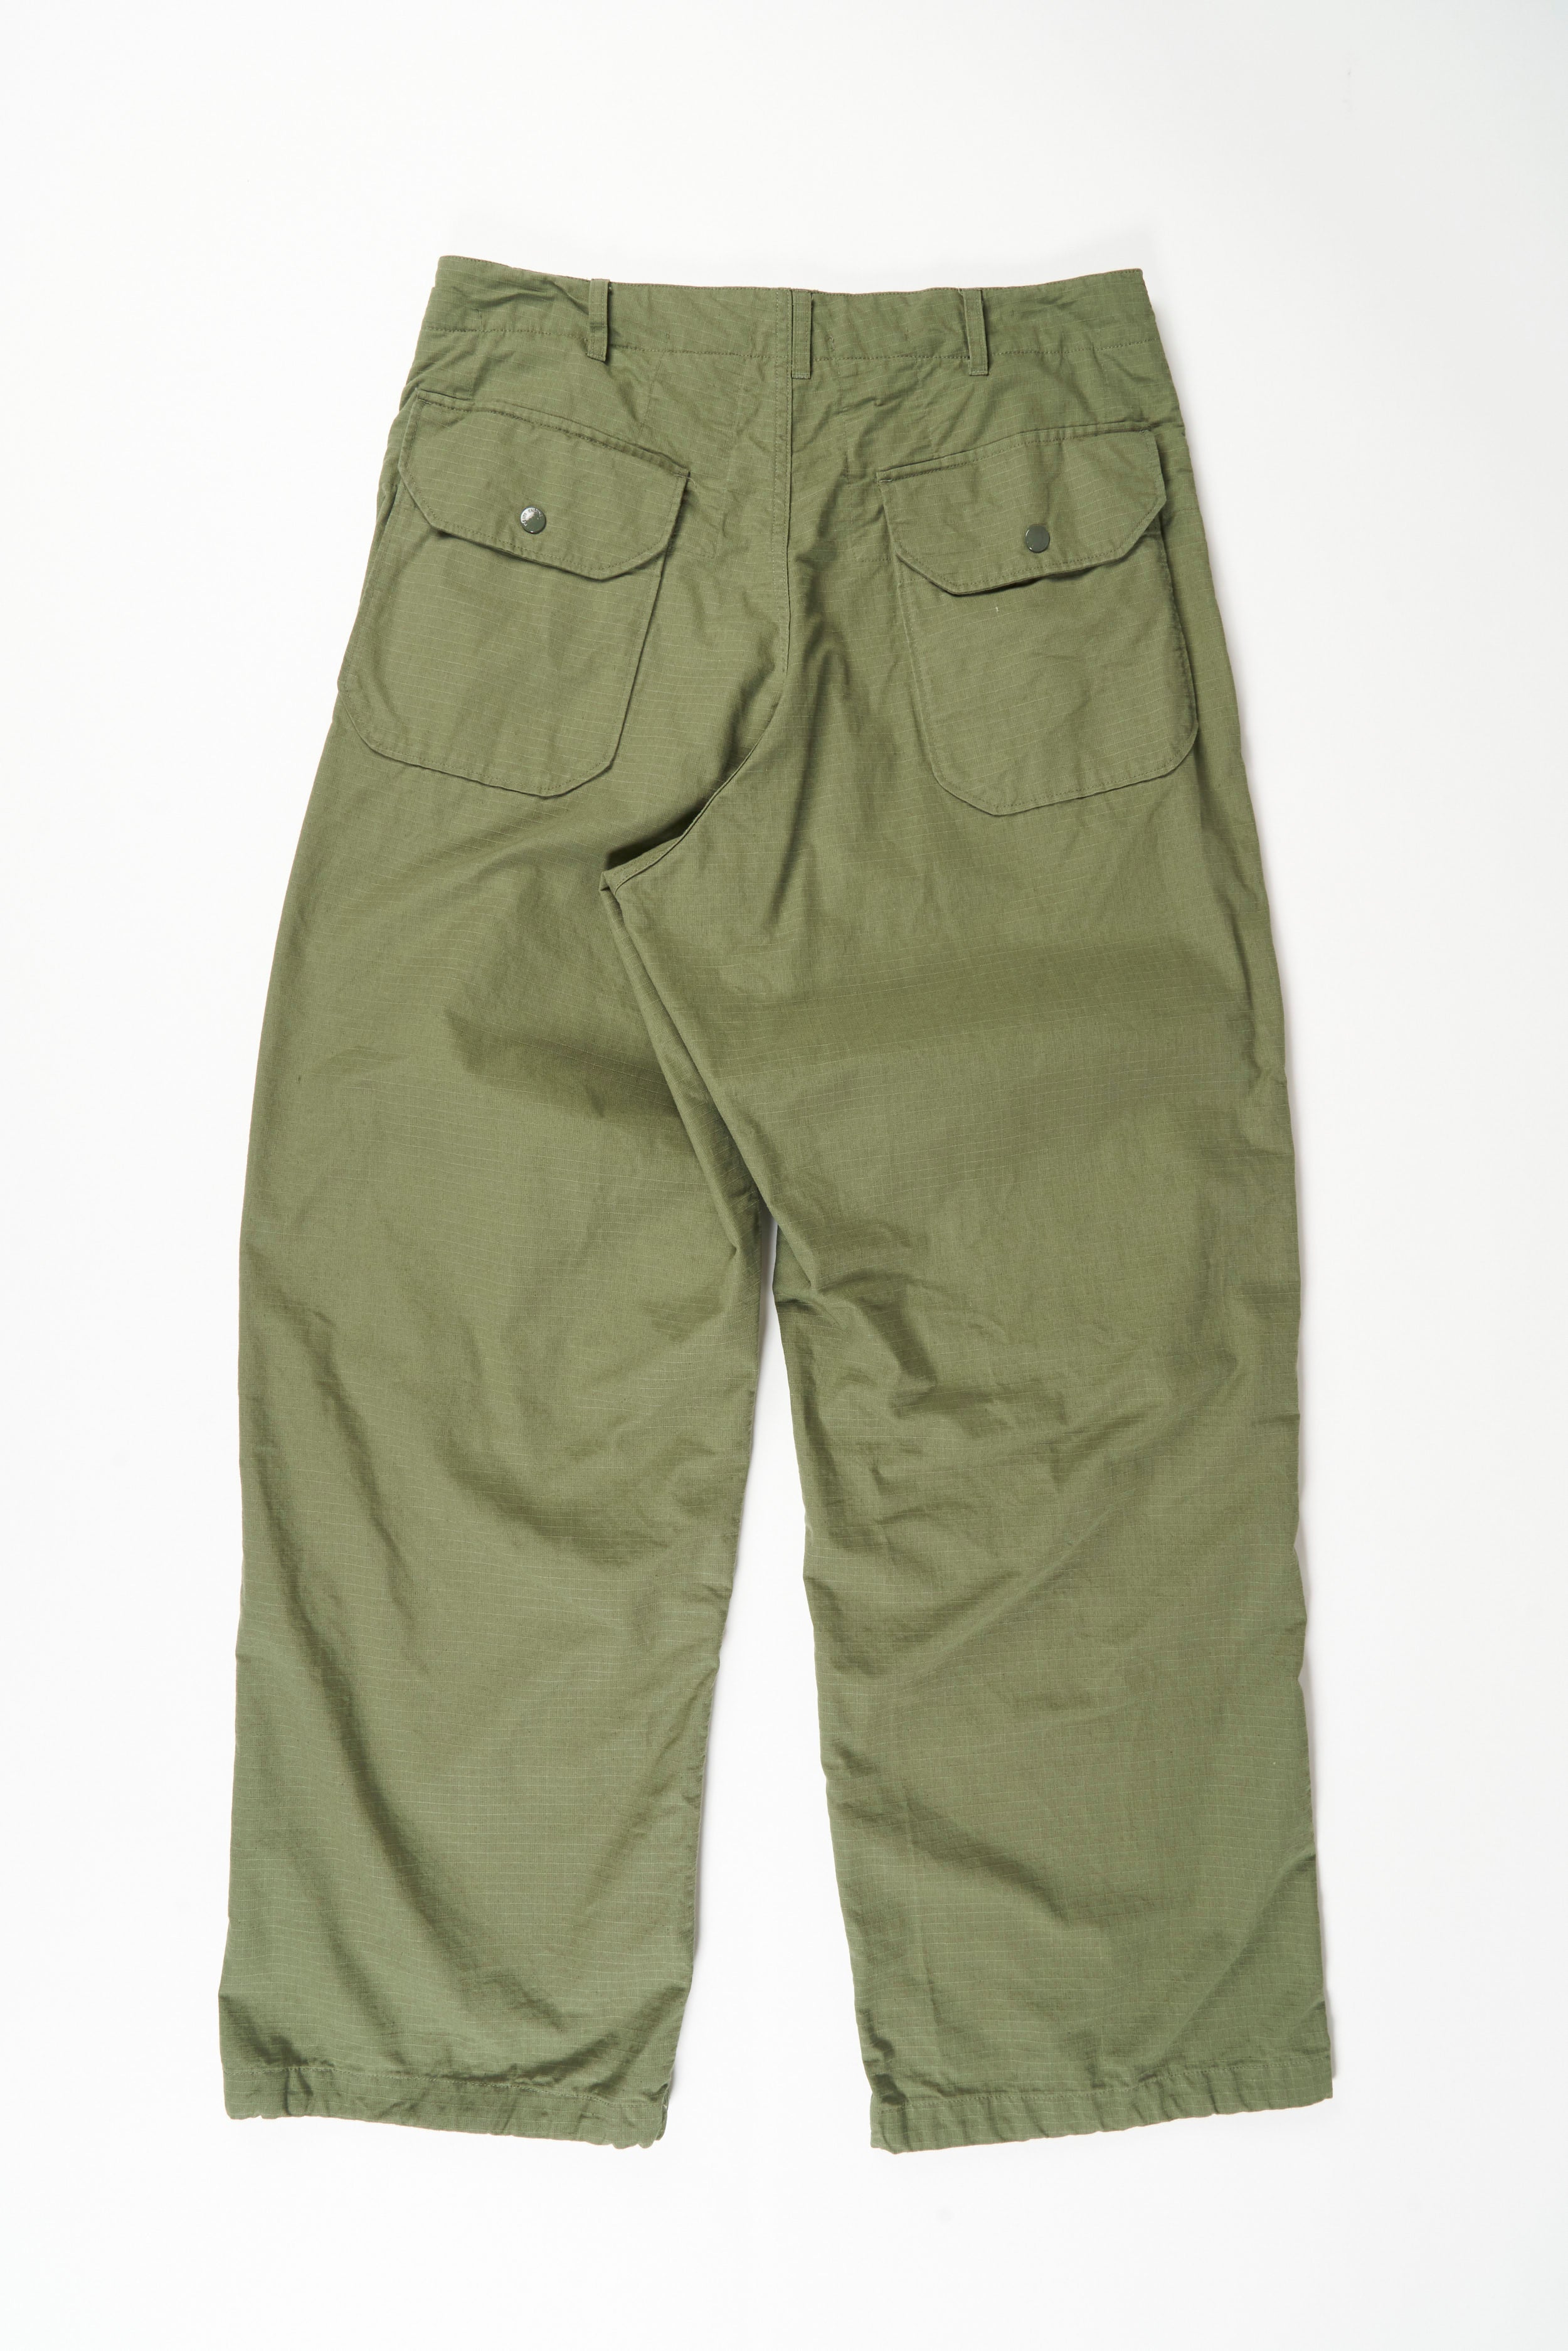 Over Pant - Olive Cotton Ripstop